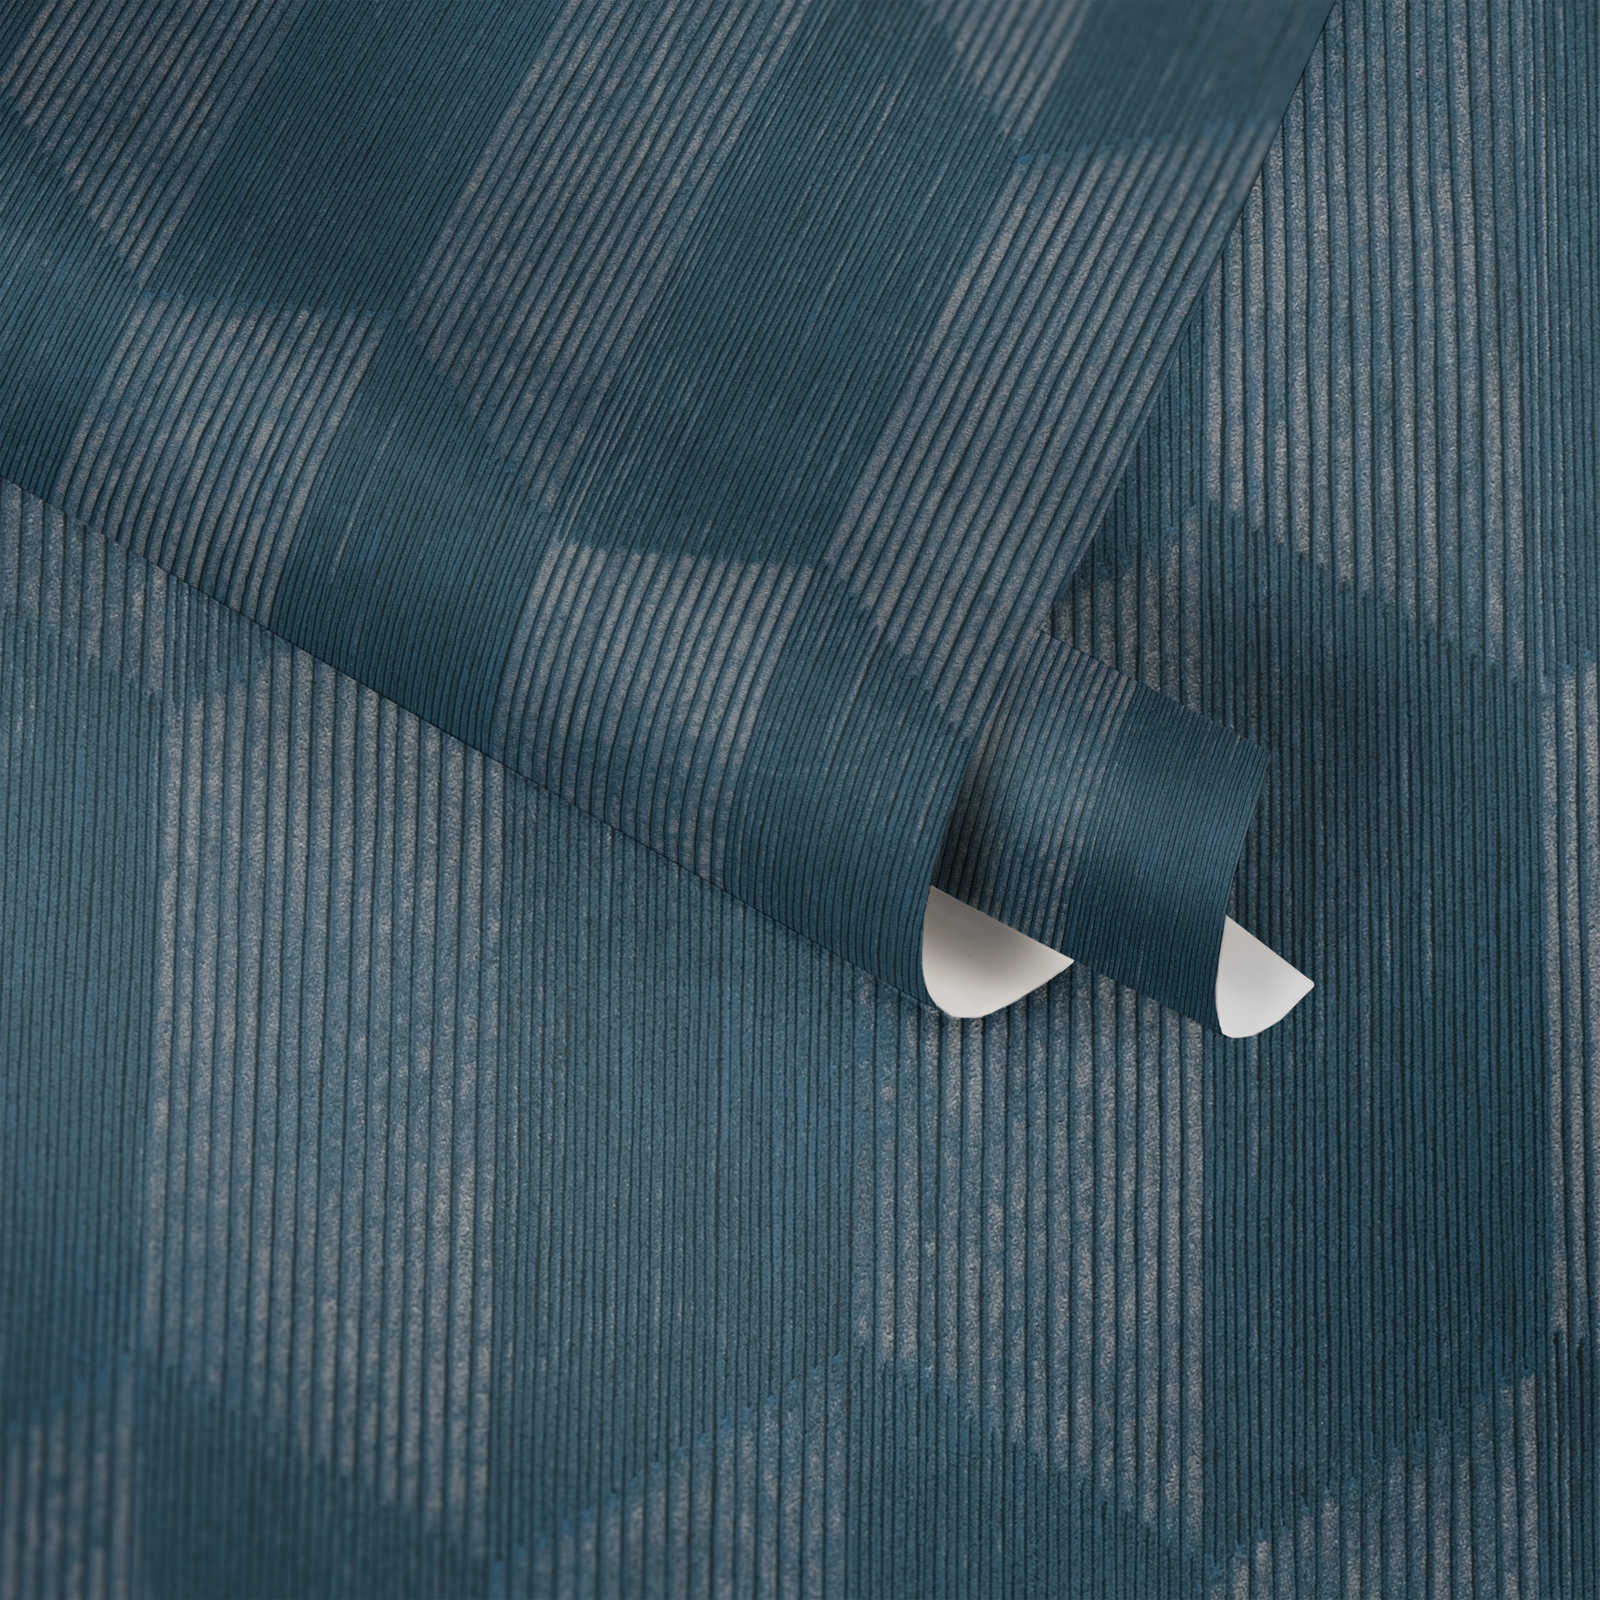             Wallpaper 3D pattern with graphic facets design - blue
        